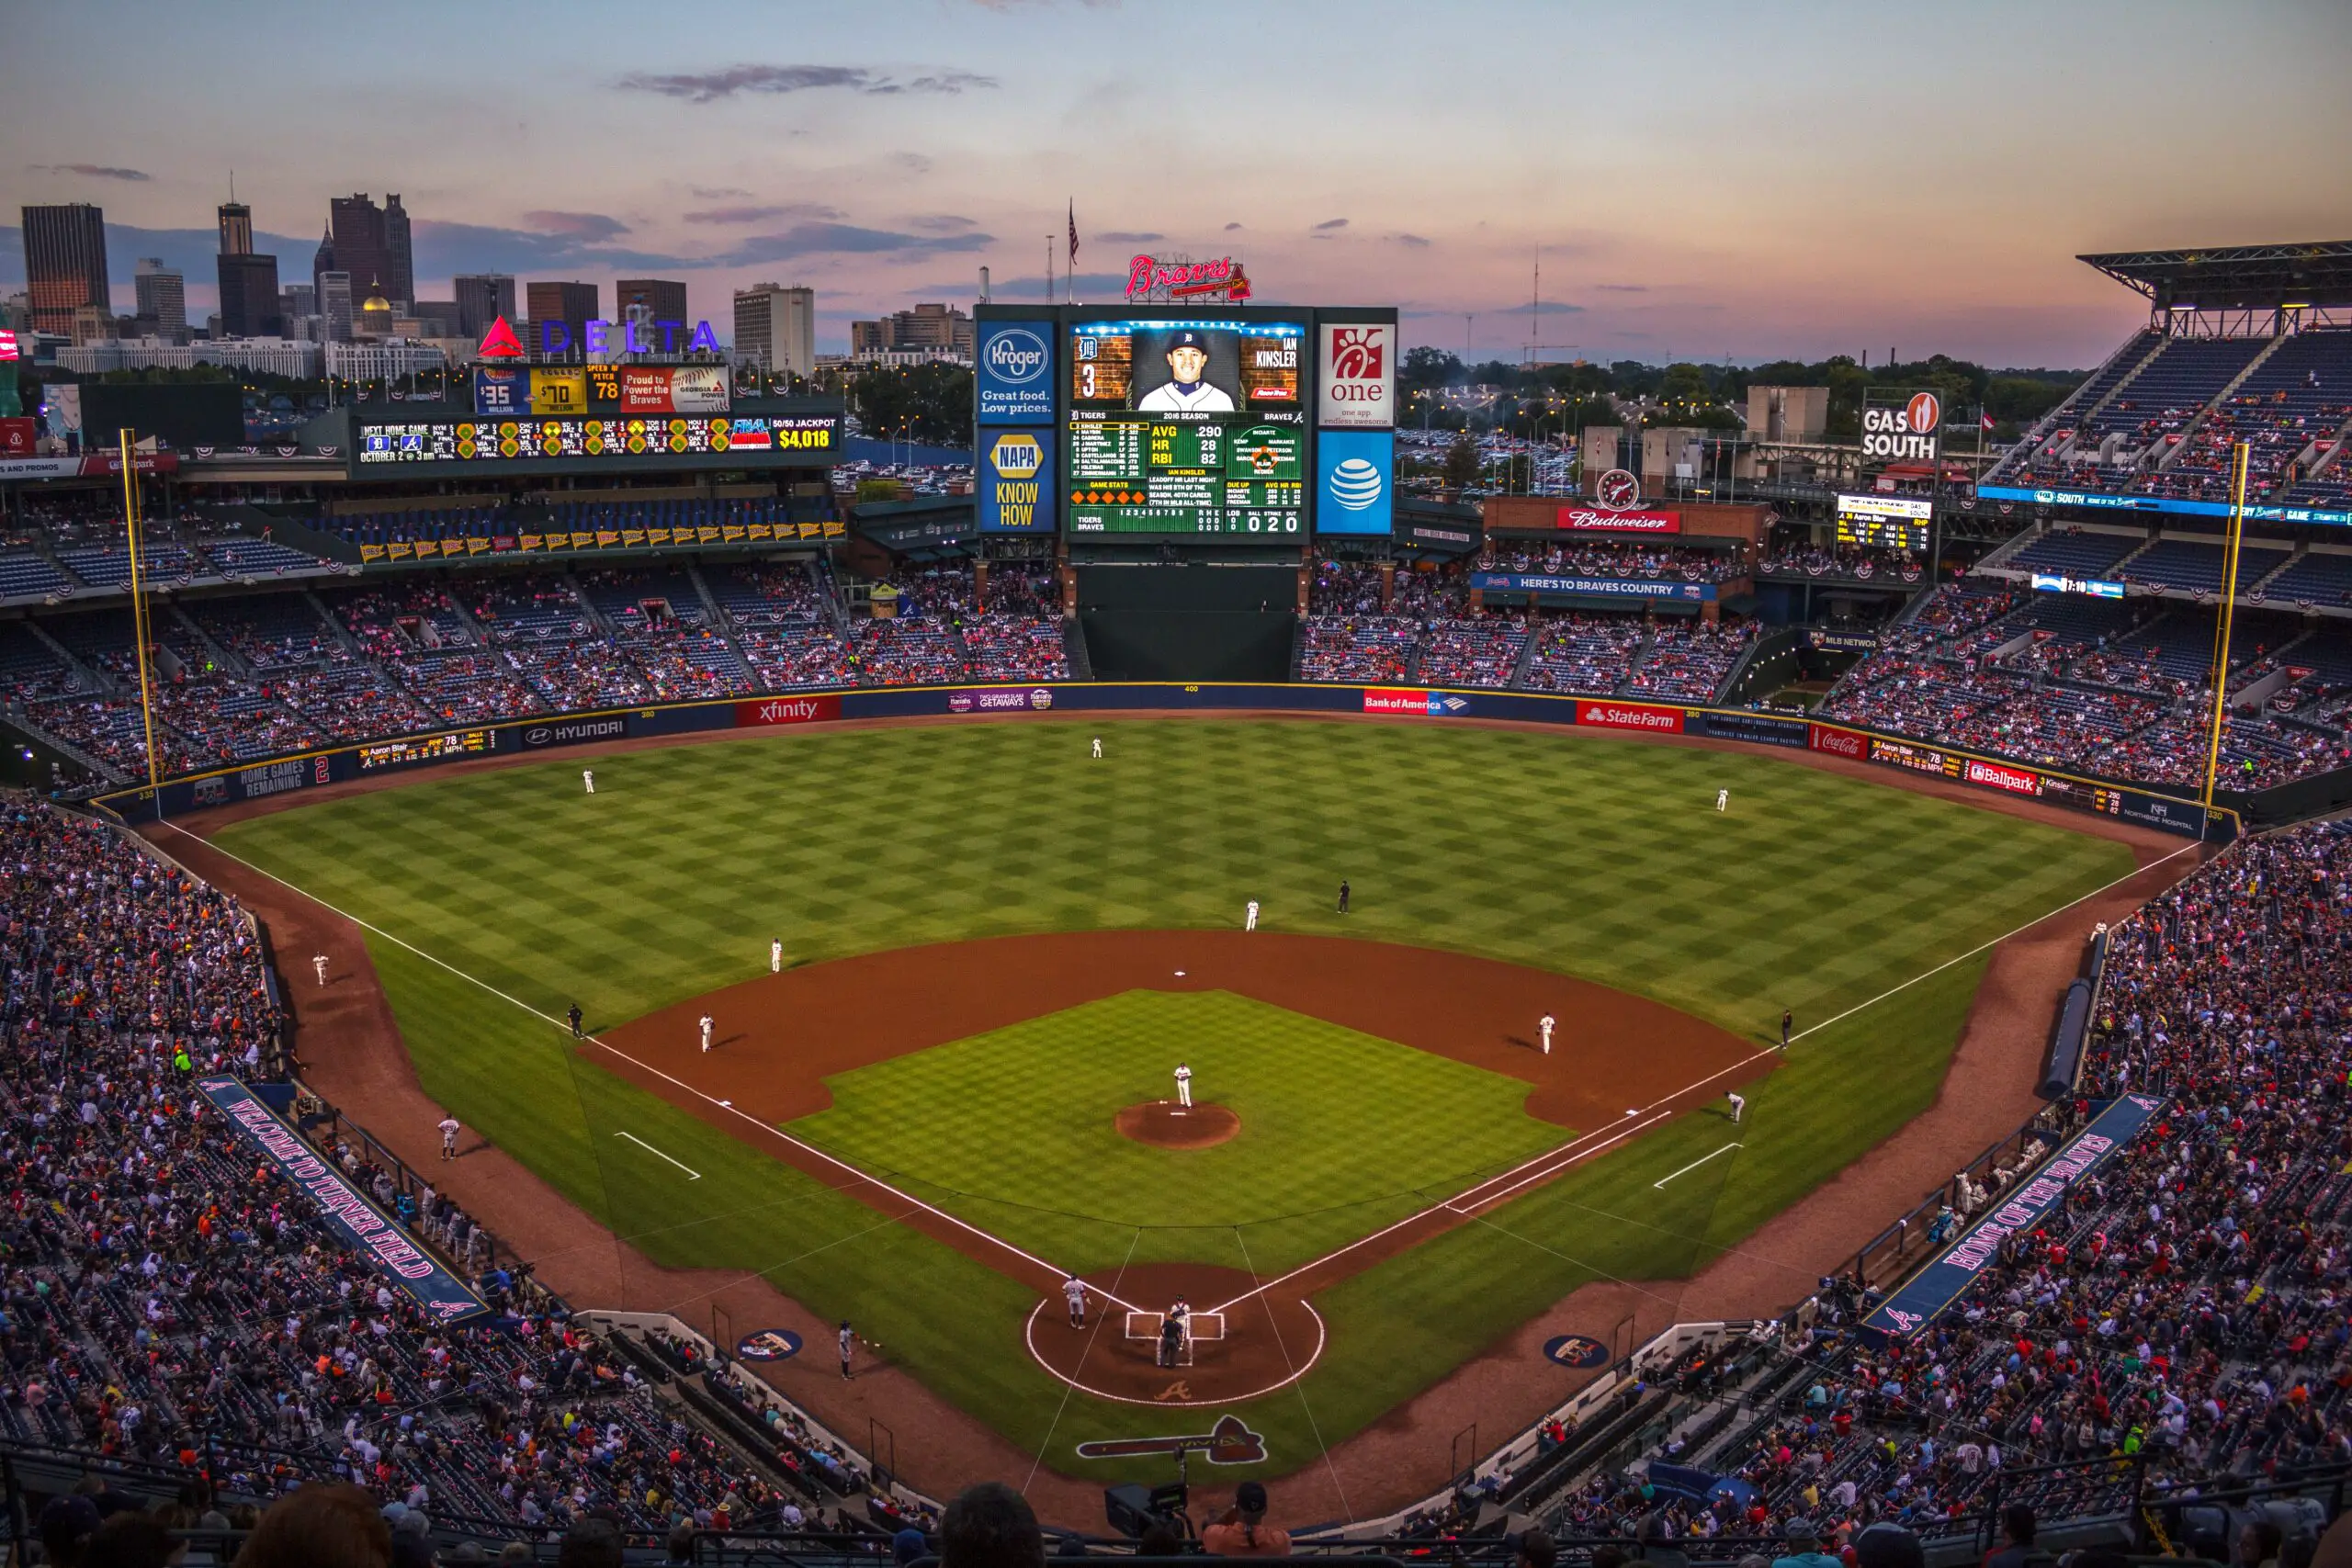 Why Do the Mets Fans Hate The Braves?